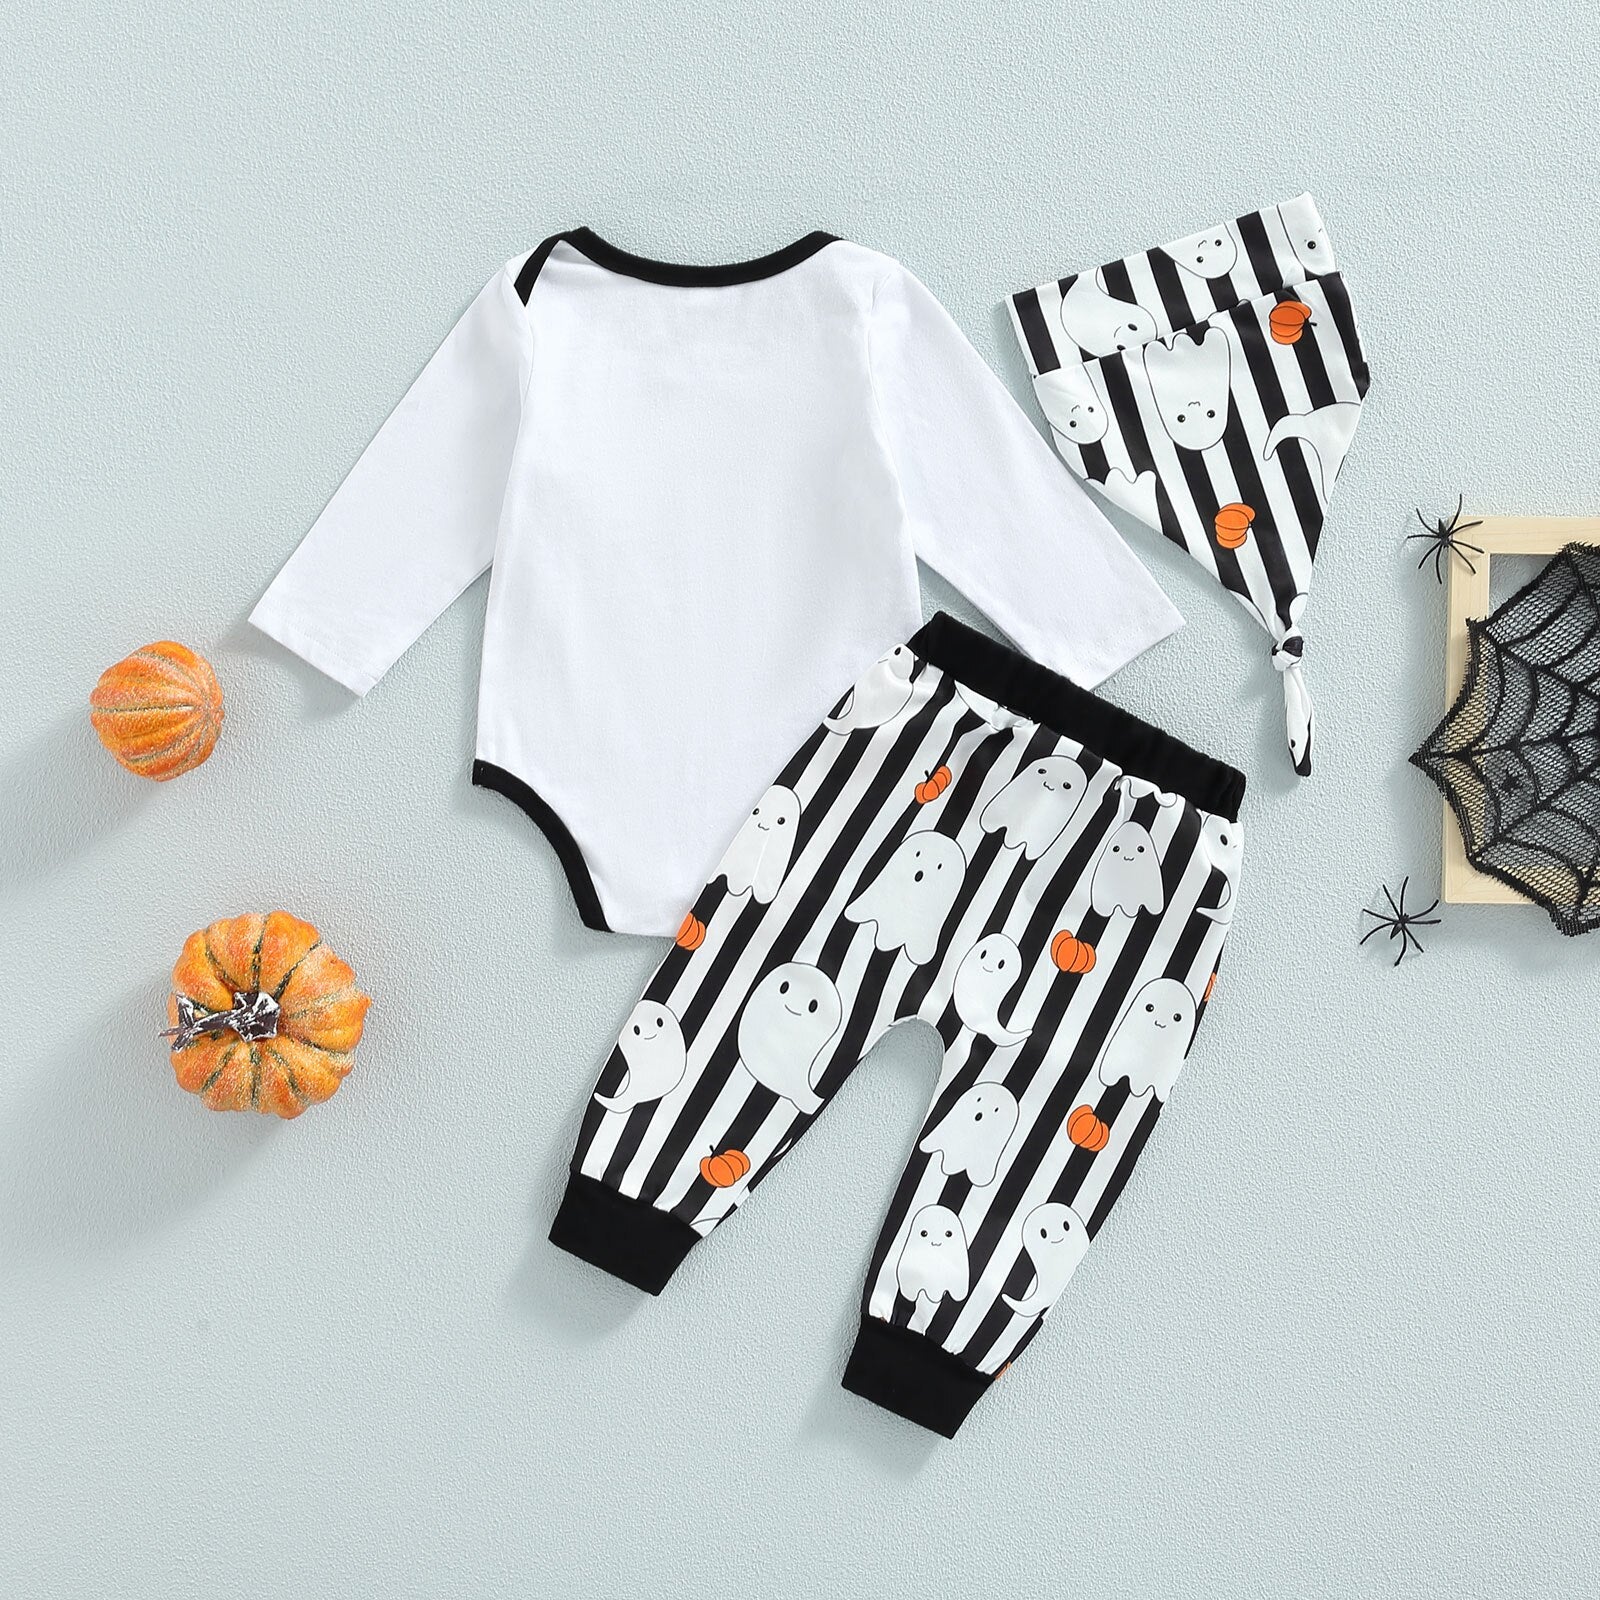 Spooky Cute: Halloween Baby Clothes Set for Girls and Boys